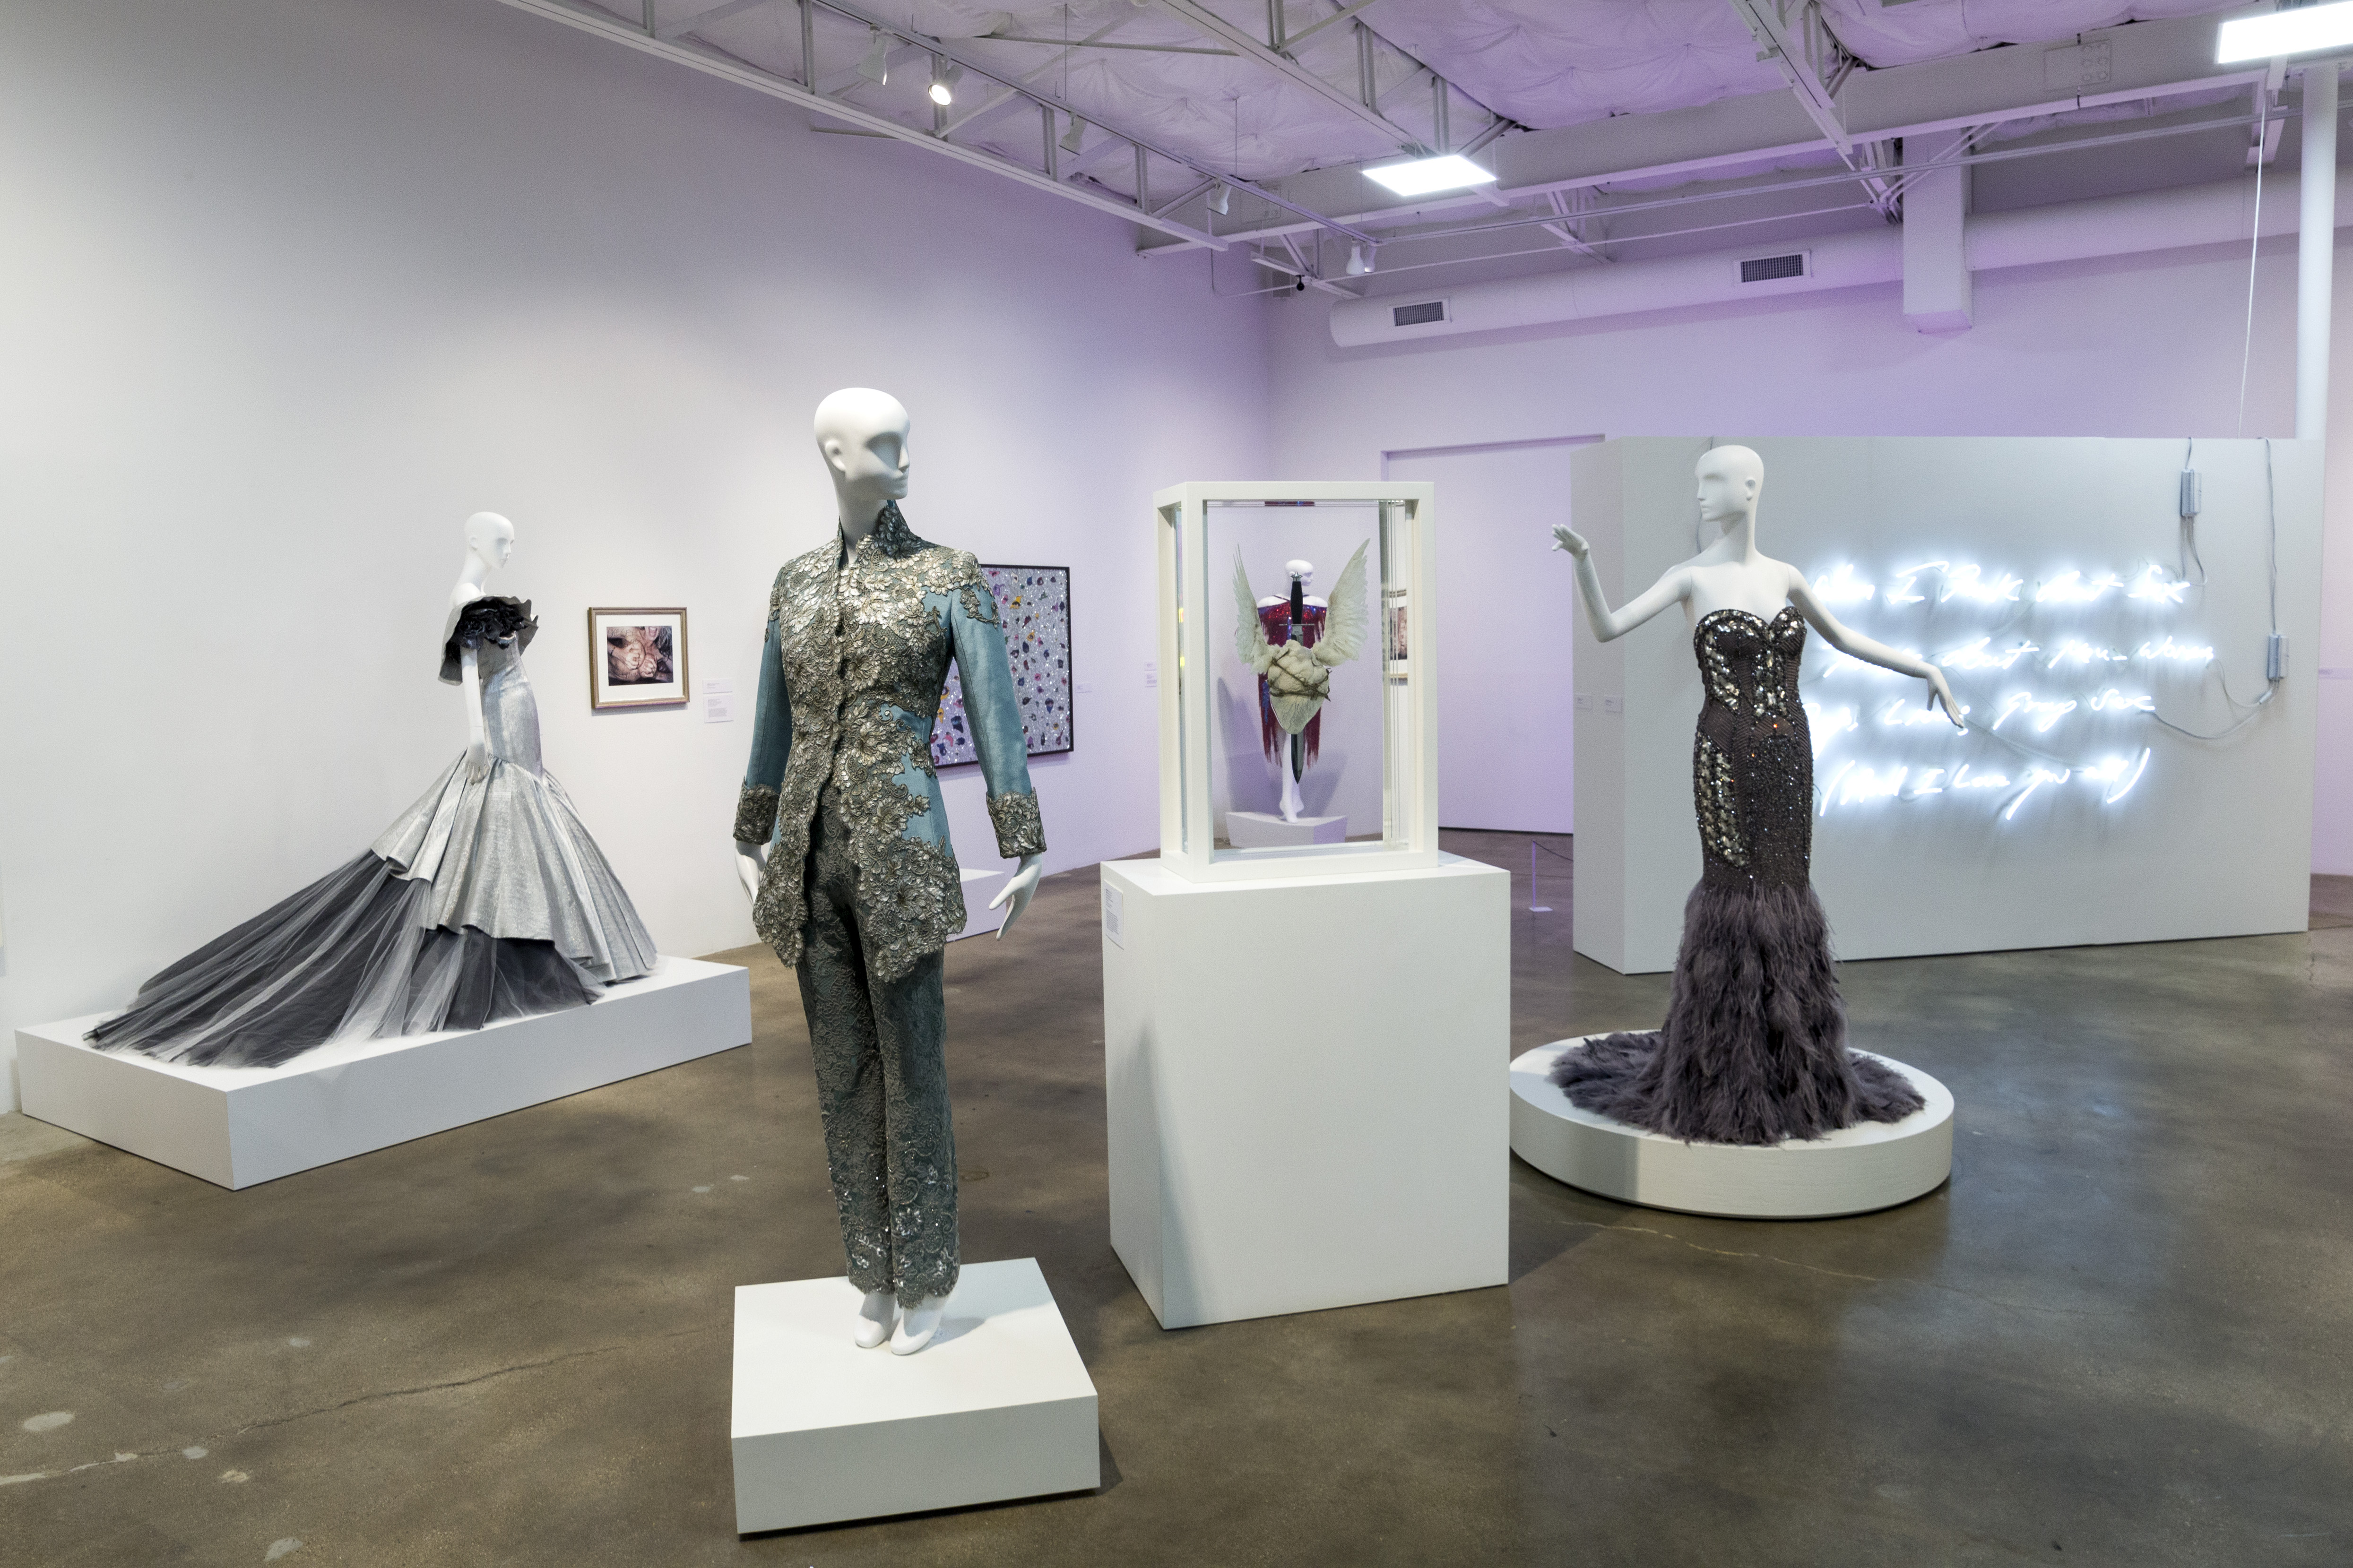 The University of North Texas’ Texas Fashion Collection is part of the exhibition “On Bodies: Highlights from The Goss-Michael Foundation and the UNT Texas Fashion Collection,” that forms a link between high fashion and British art. It will run through Feb. 2 (Friday), 2018 at the Goss-Michael Foundation, 1305 Wycliff Ave #120 in Dallas. It features garments by Zac Posen, John Galliano for Givenchy and Escada shown with artworks by Damien Hirst and Tracey Emin. Photo by Abigail Firth.